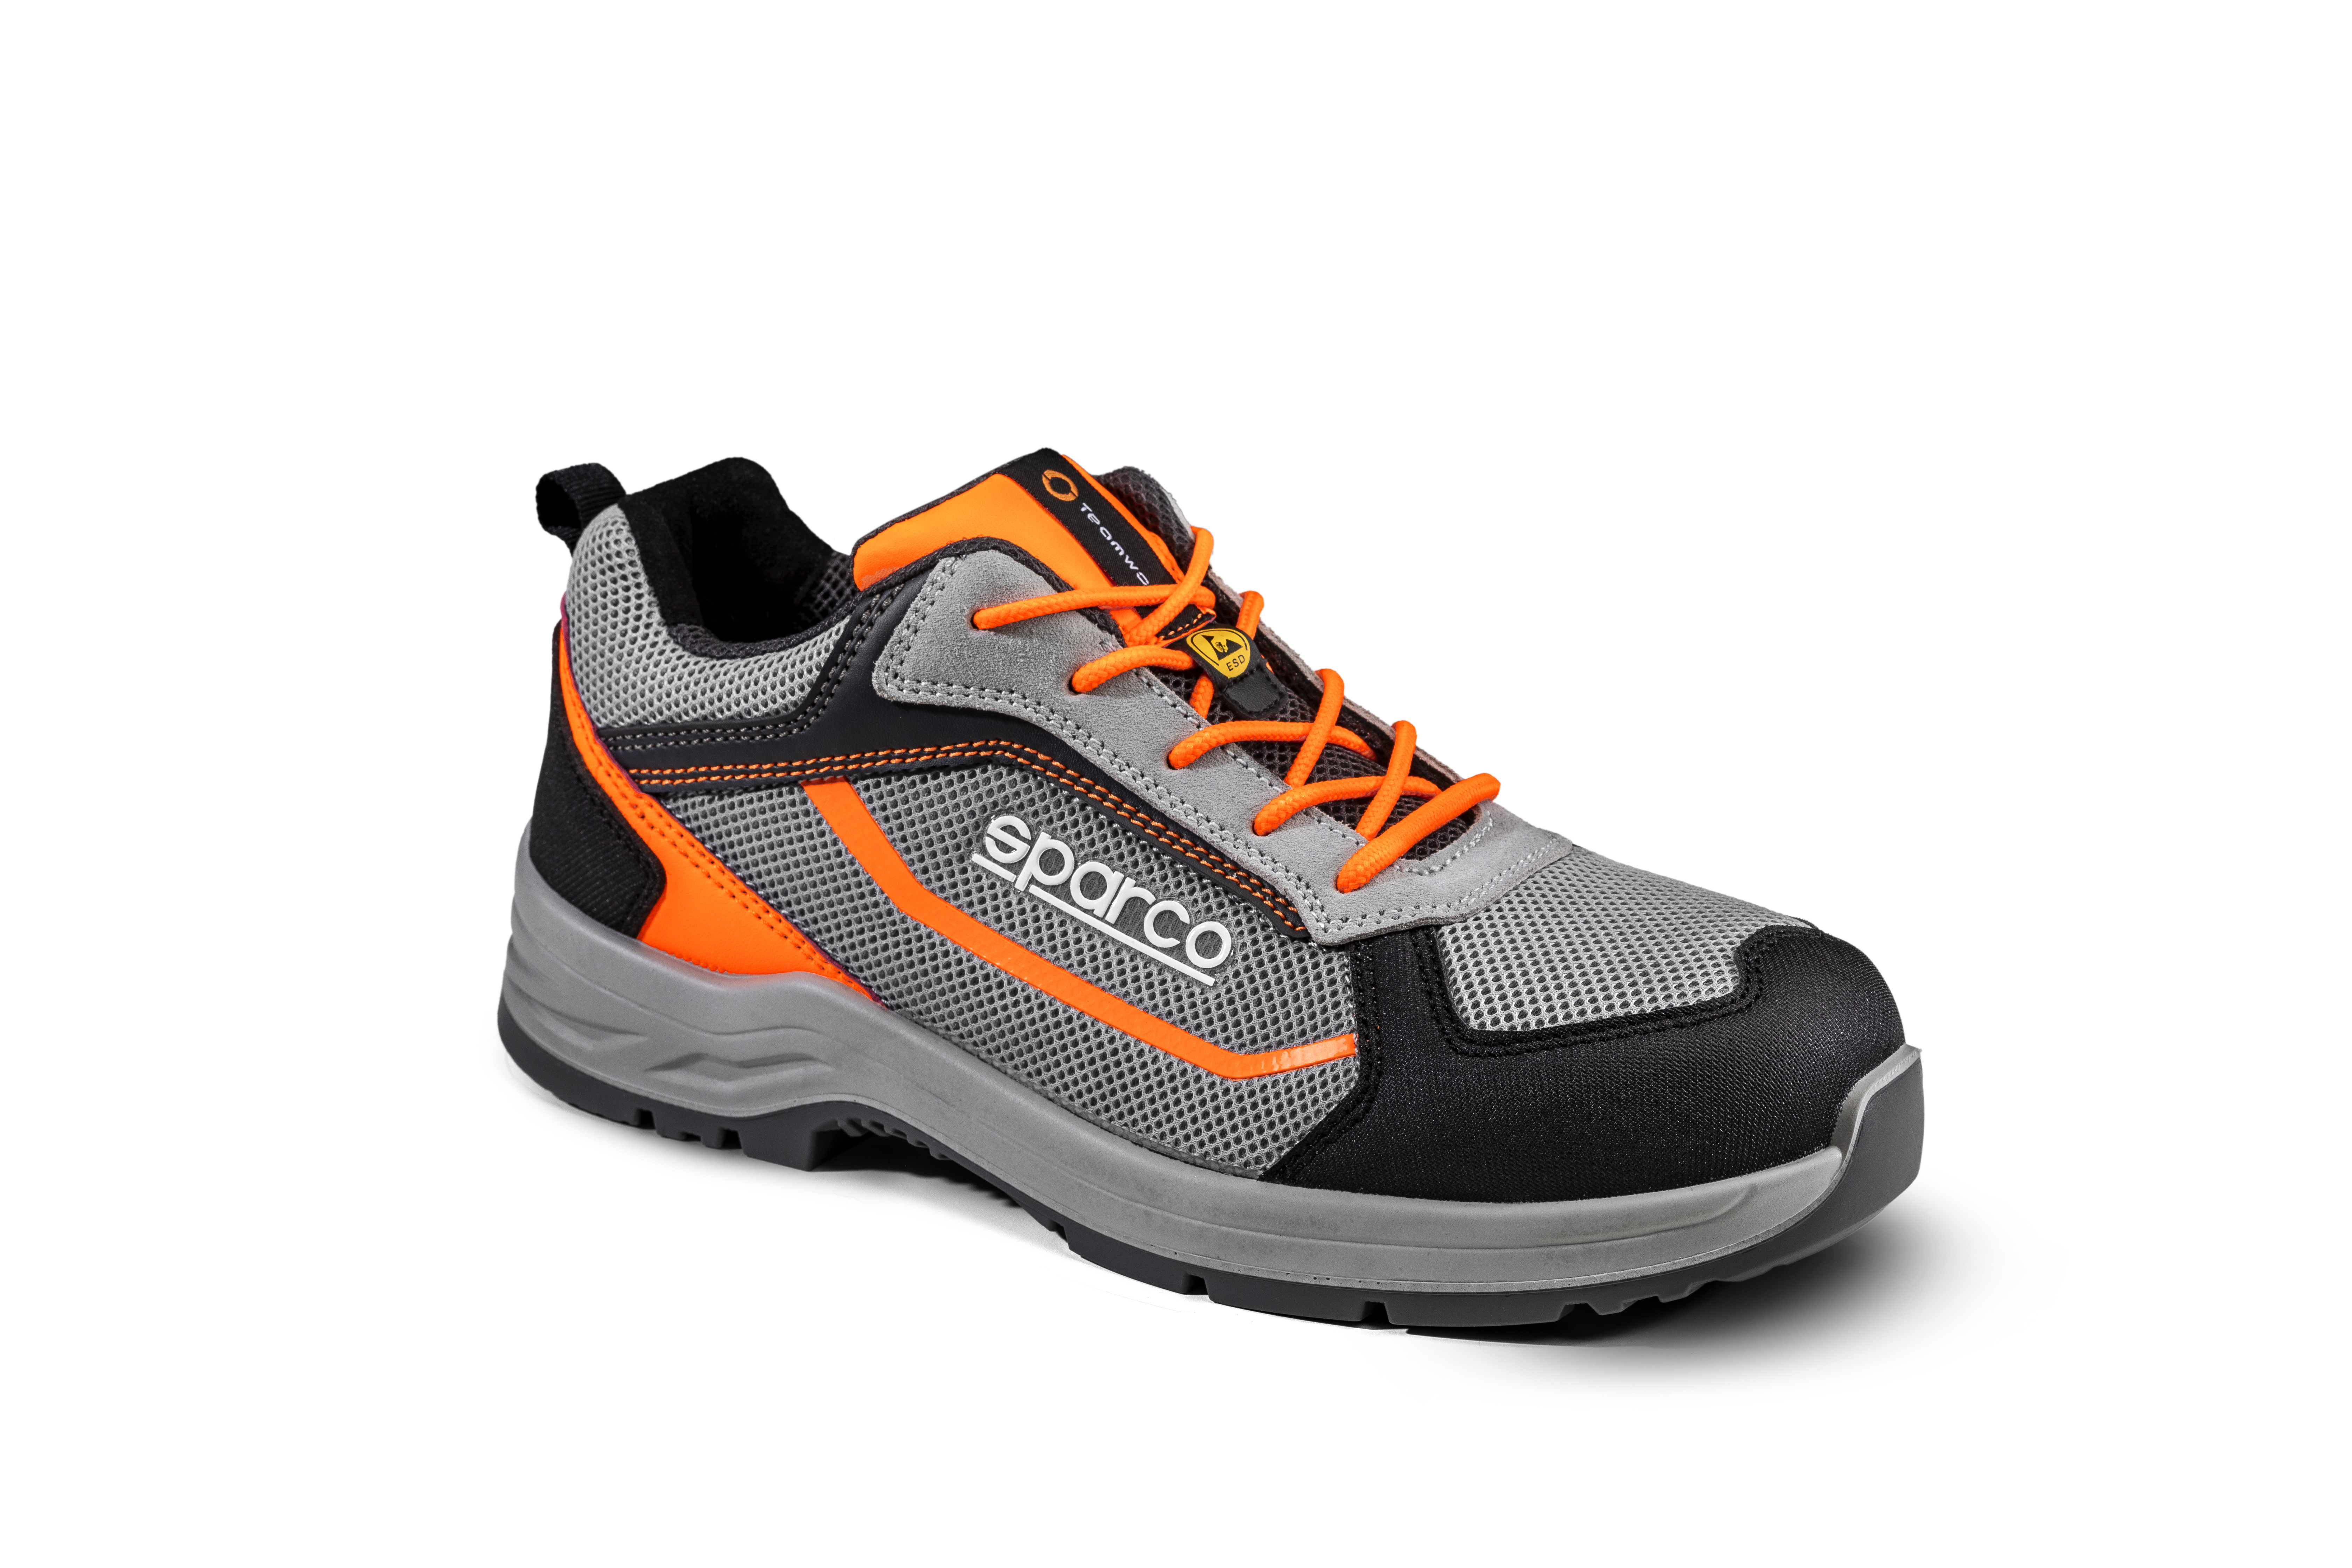 NDIS SCARPA INDY-R S1P ESD TG 48 GR